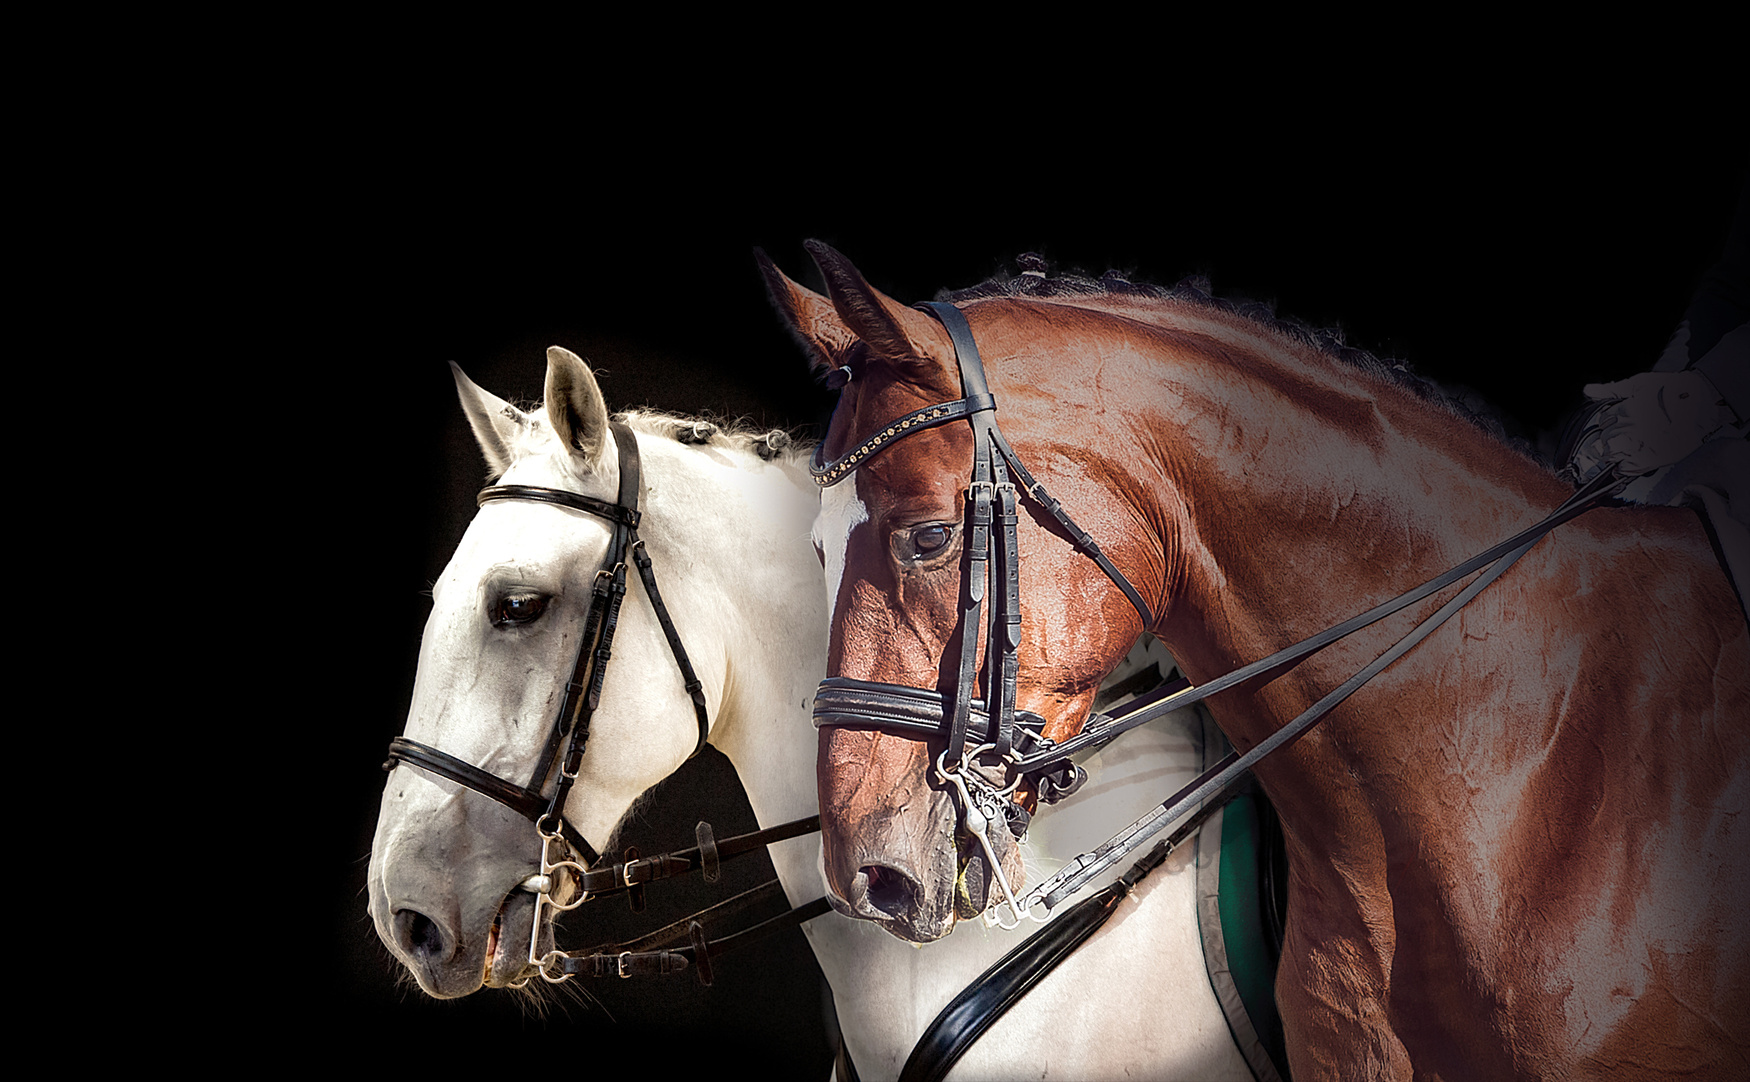 Two dressage horses